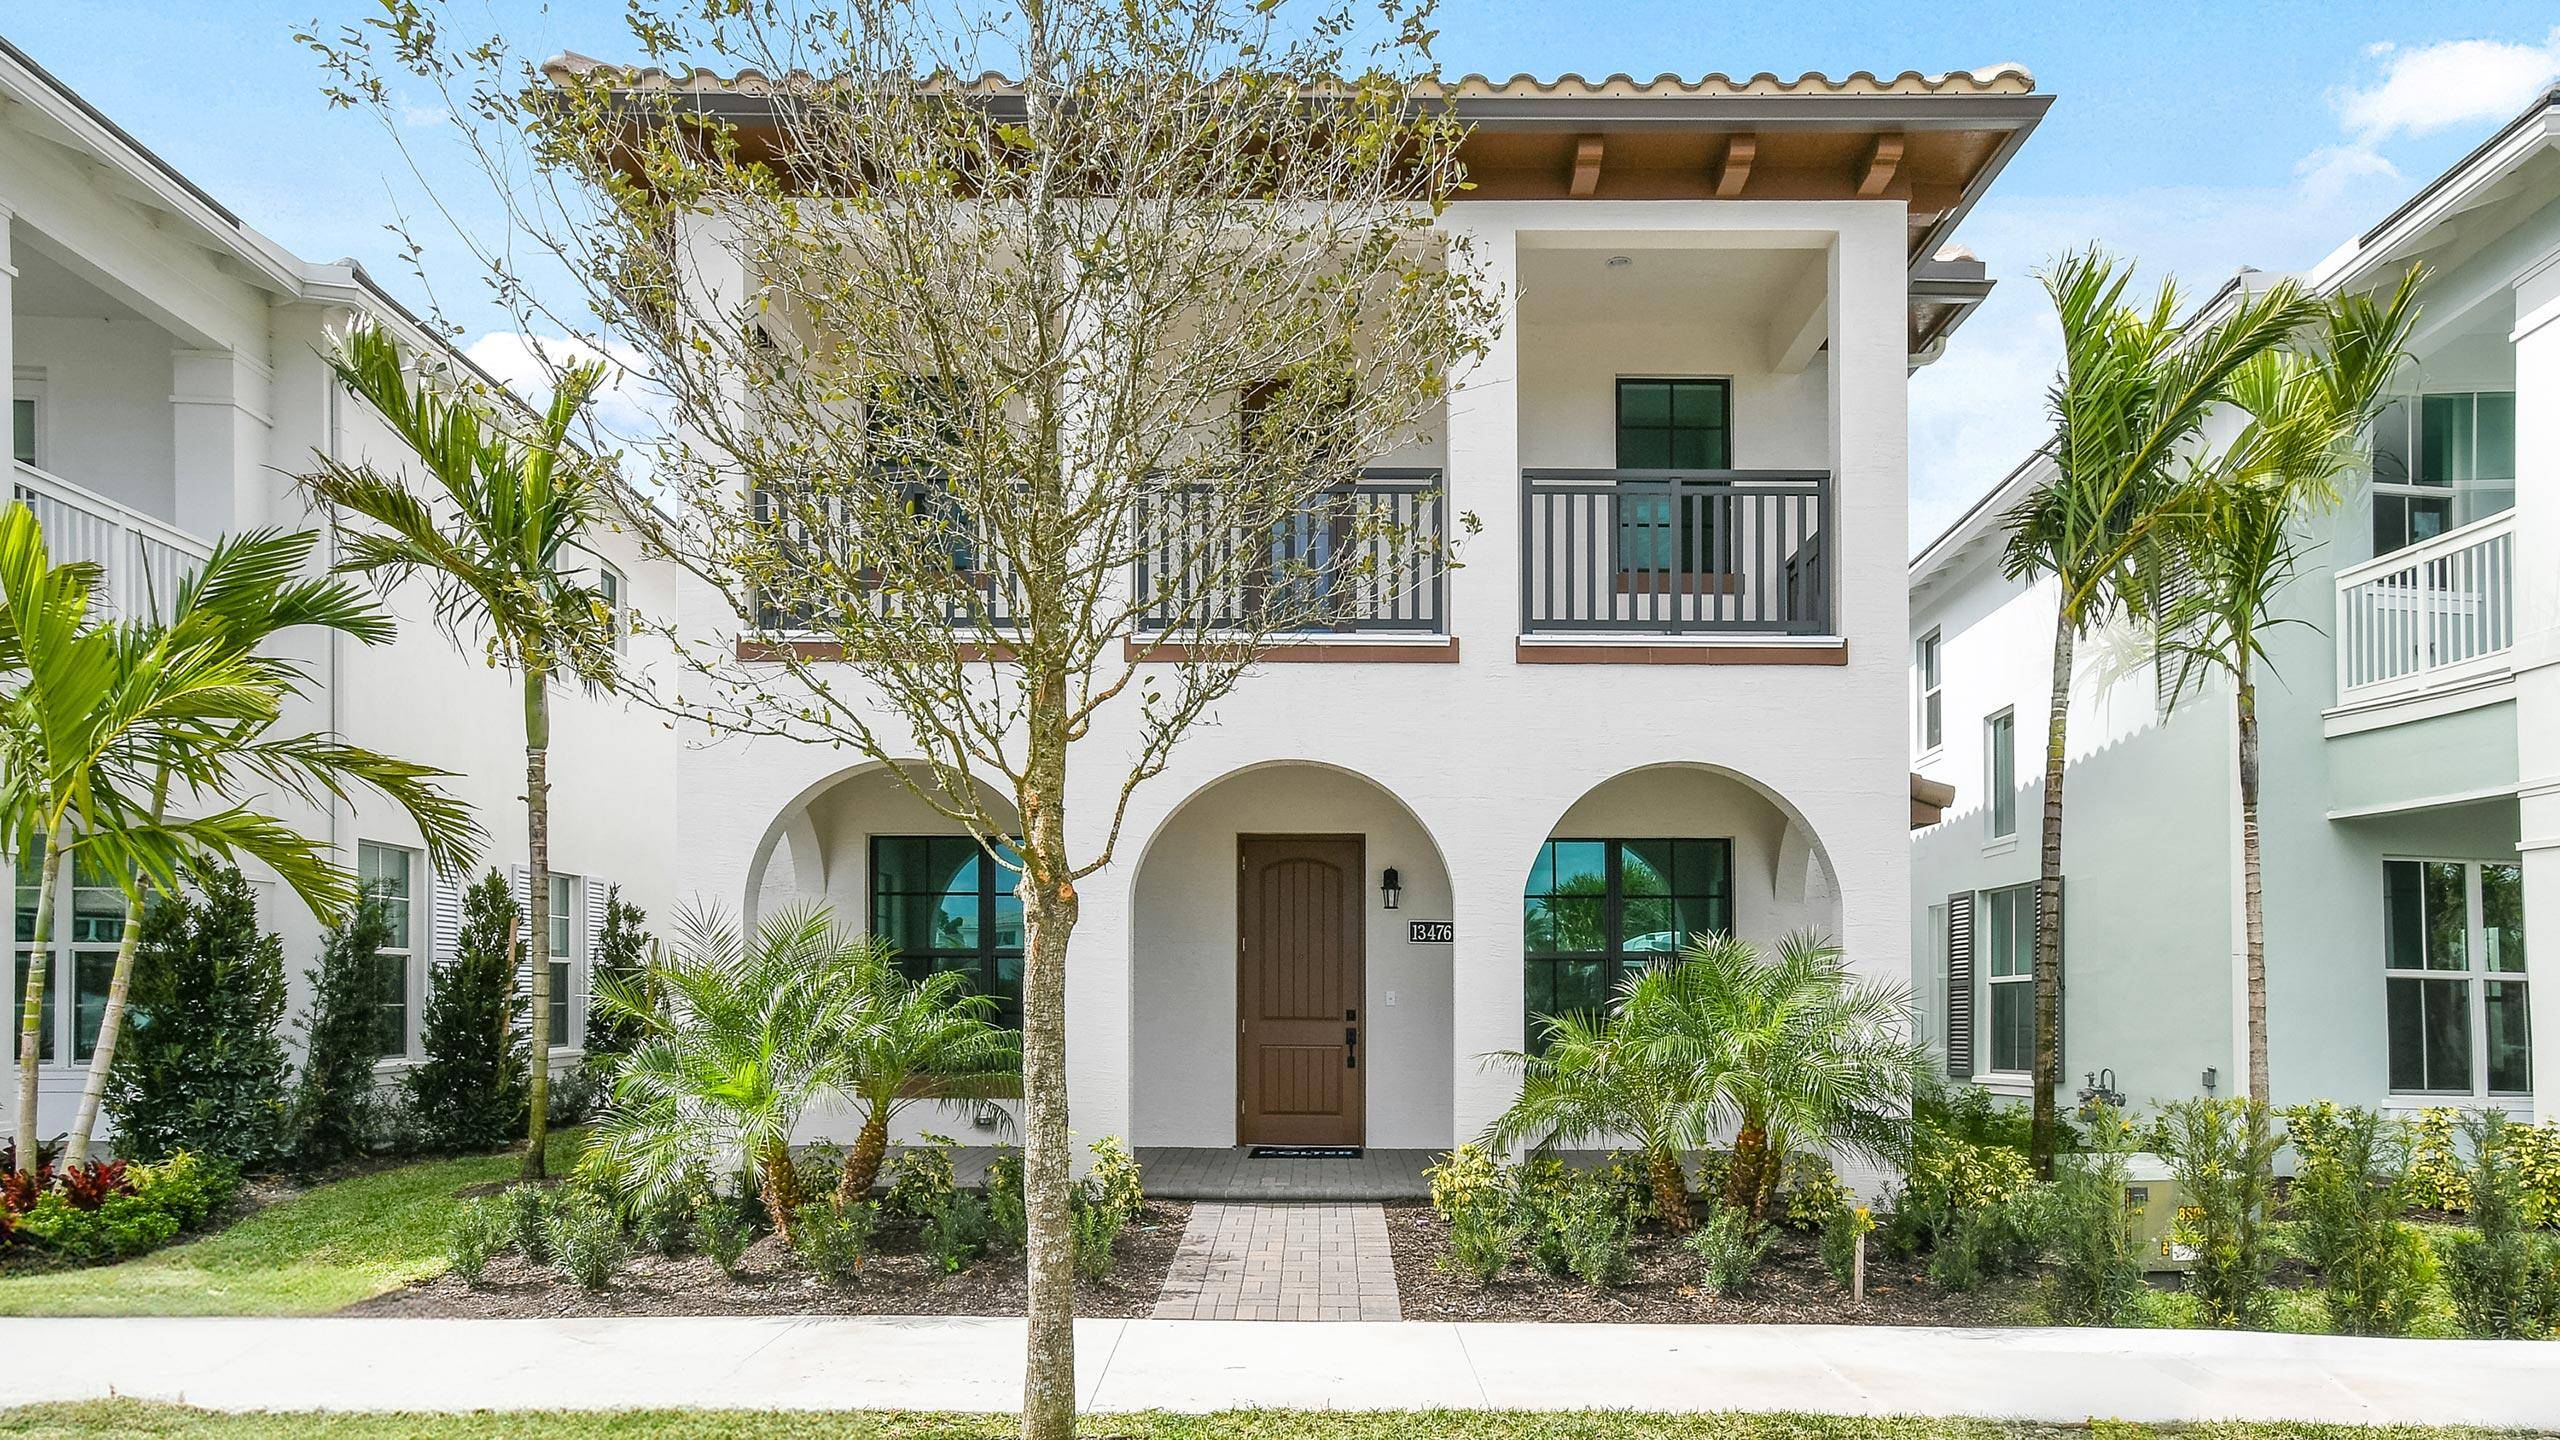 MOVE IN READY. Welcome to luxury waterfront living in the prestigious Alton community by Kolter Homes, nestled in the heart of Palm Beach Gardens, Florida.